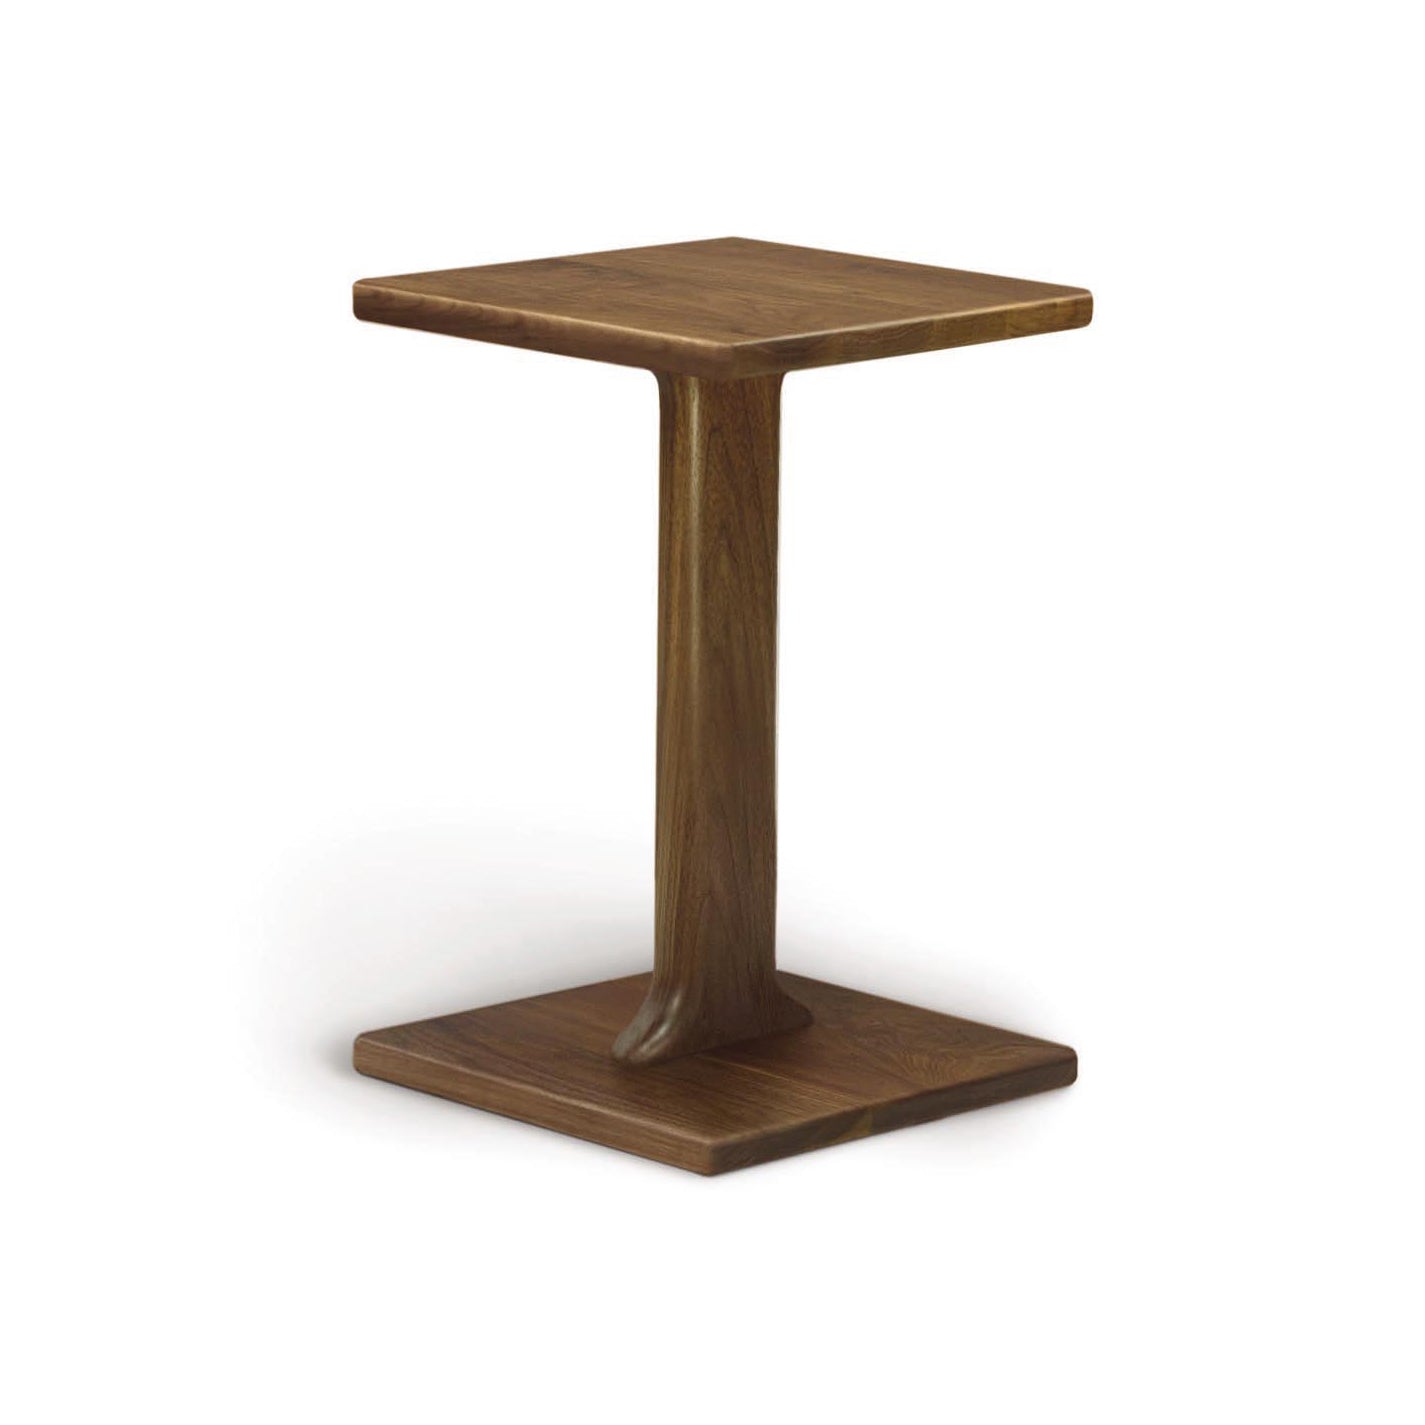 The Copeland Furniture Sierra Chair Table is a wooden table with a square base that showcases exquisite hardwood construction. It is presented on a clean white background.